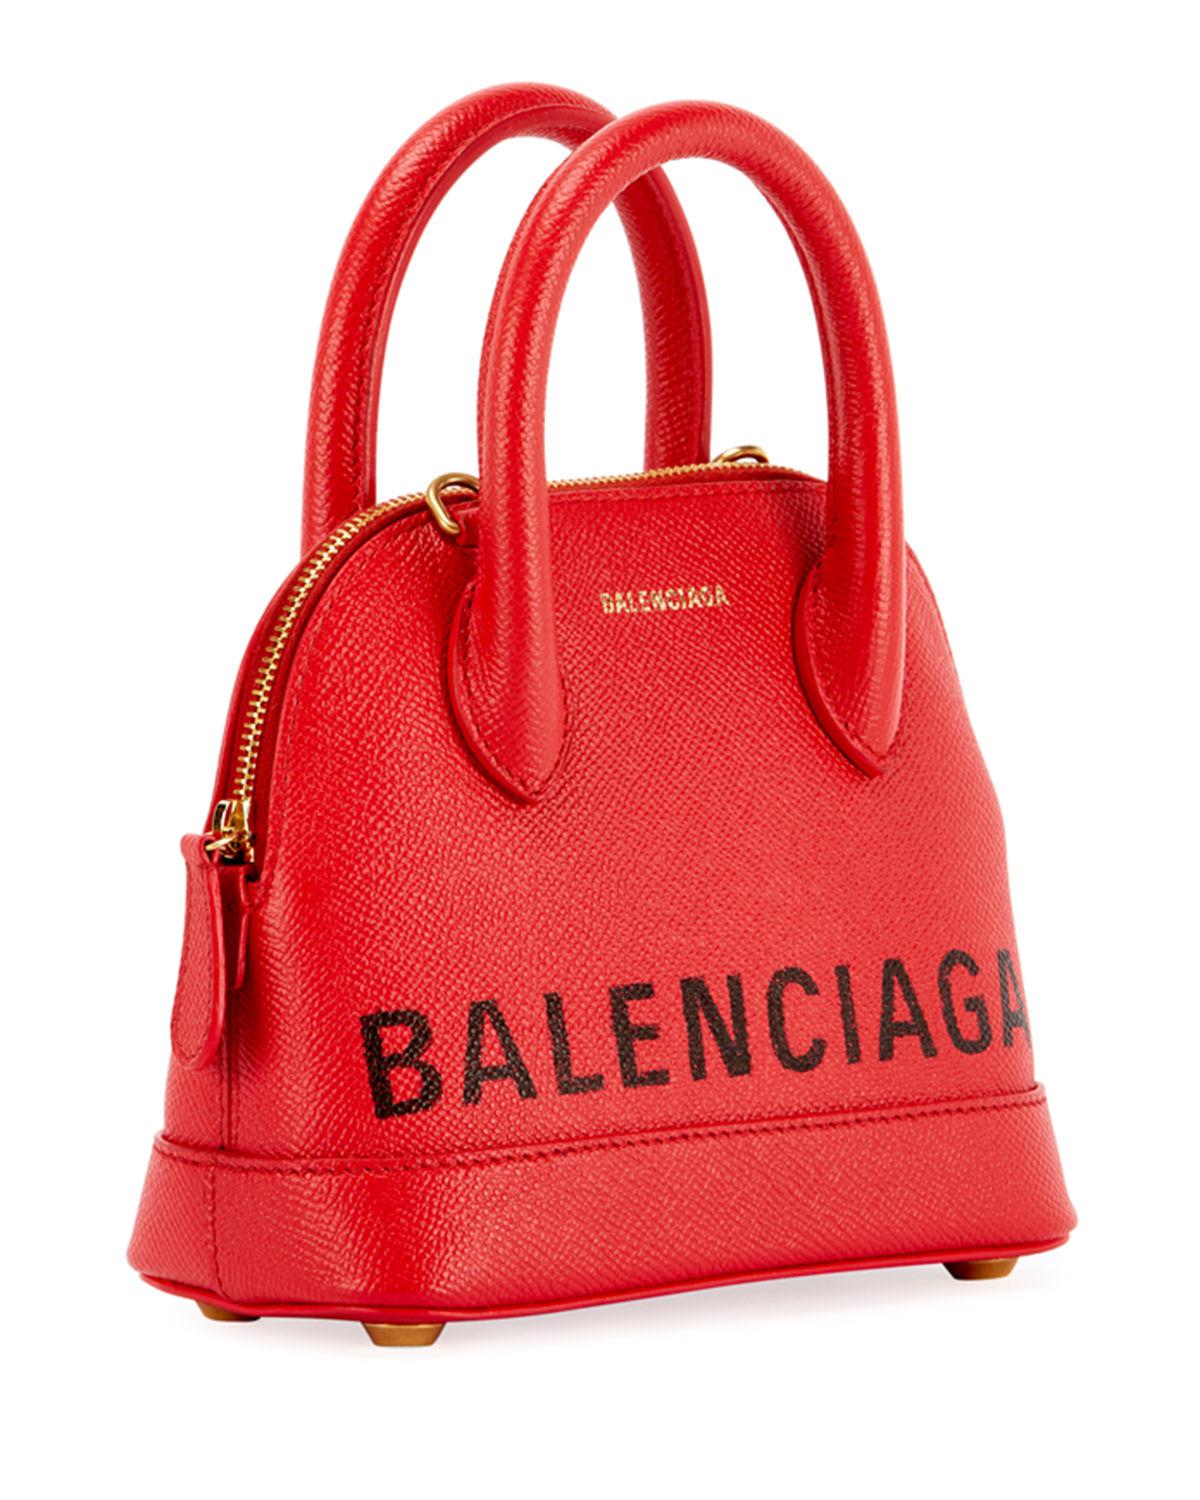 Balenciaga Ville Xxs Pebbled Leather Top-handle Tote Bag in Red - Lyst